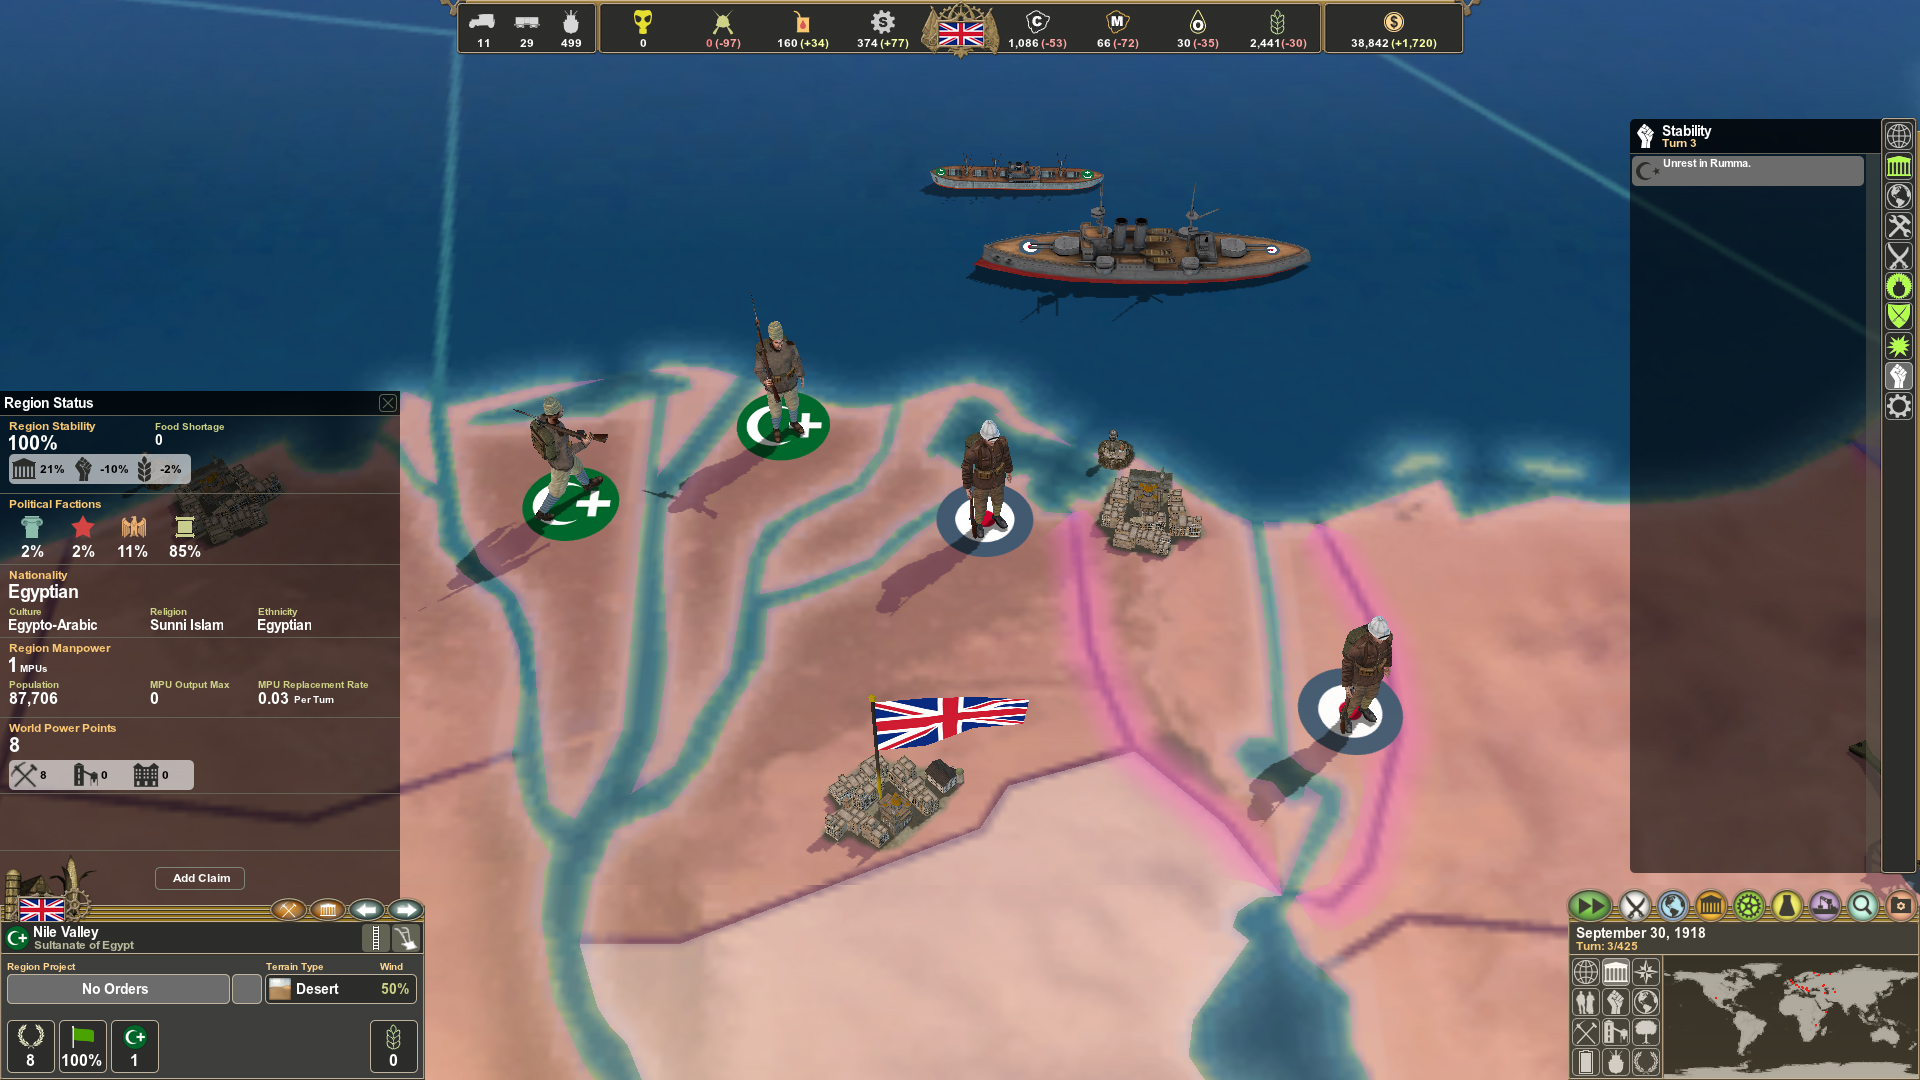 Making History II: The War of the World on Steam